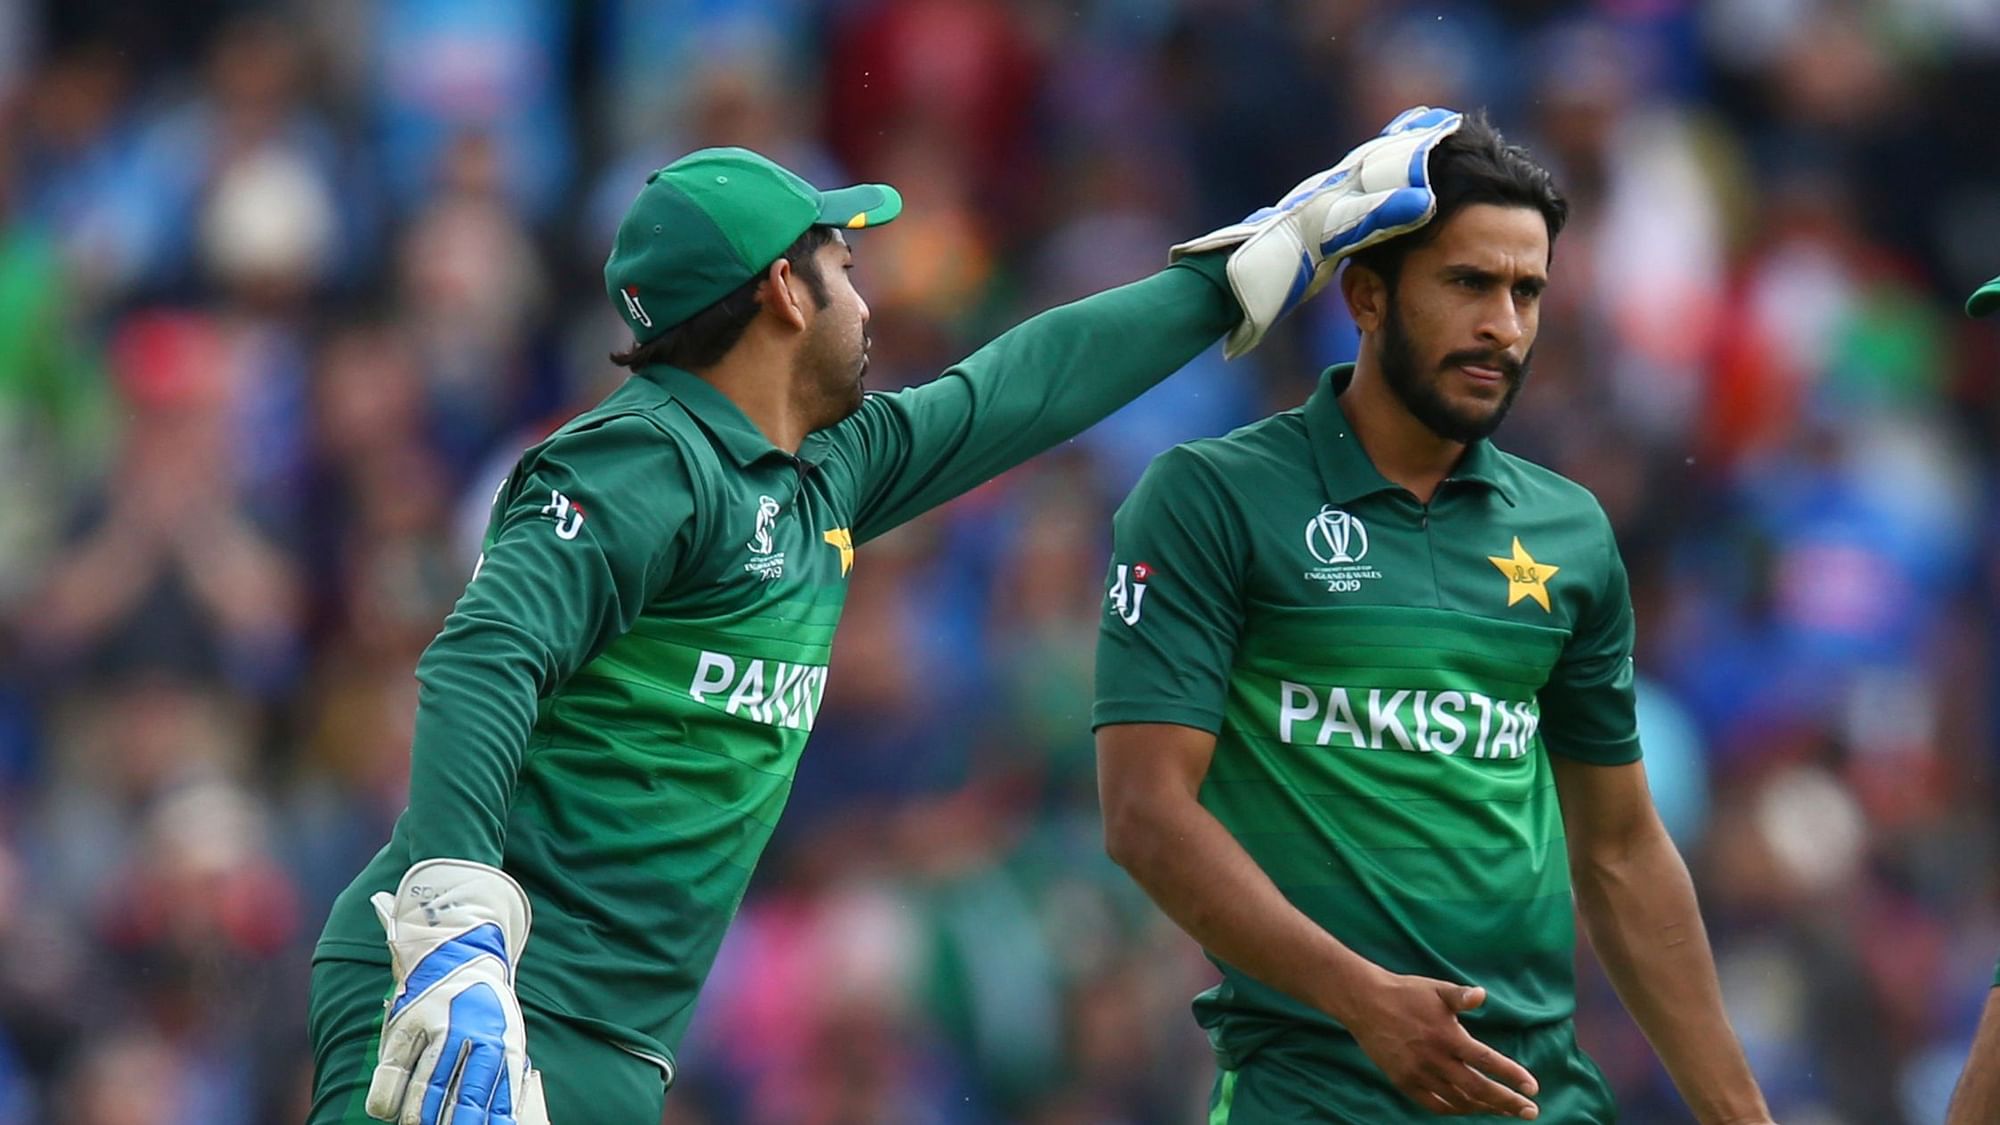 Pakistan’s Hasan Ali has faced a lot of criticism for a Tweet that he’s since deleted.